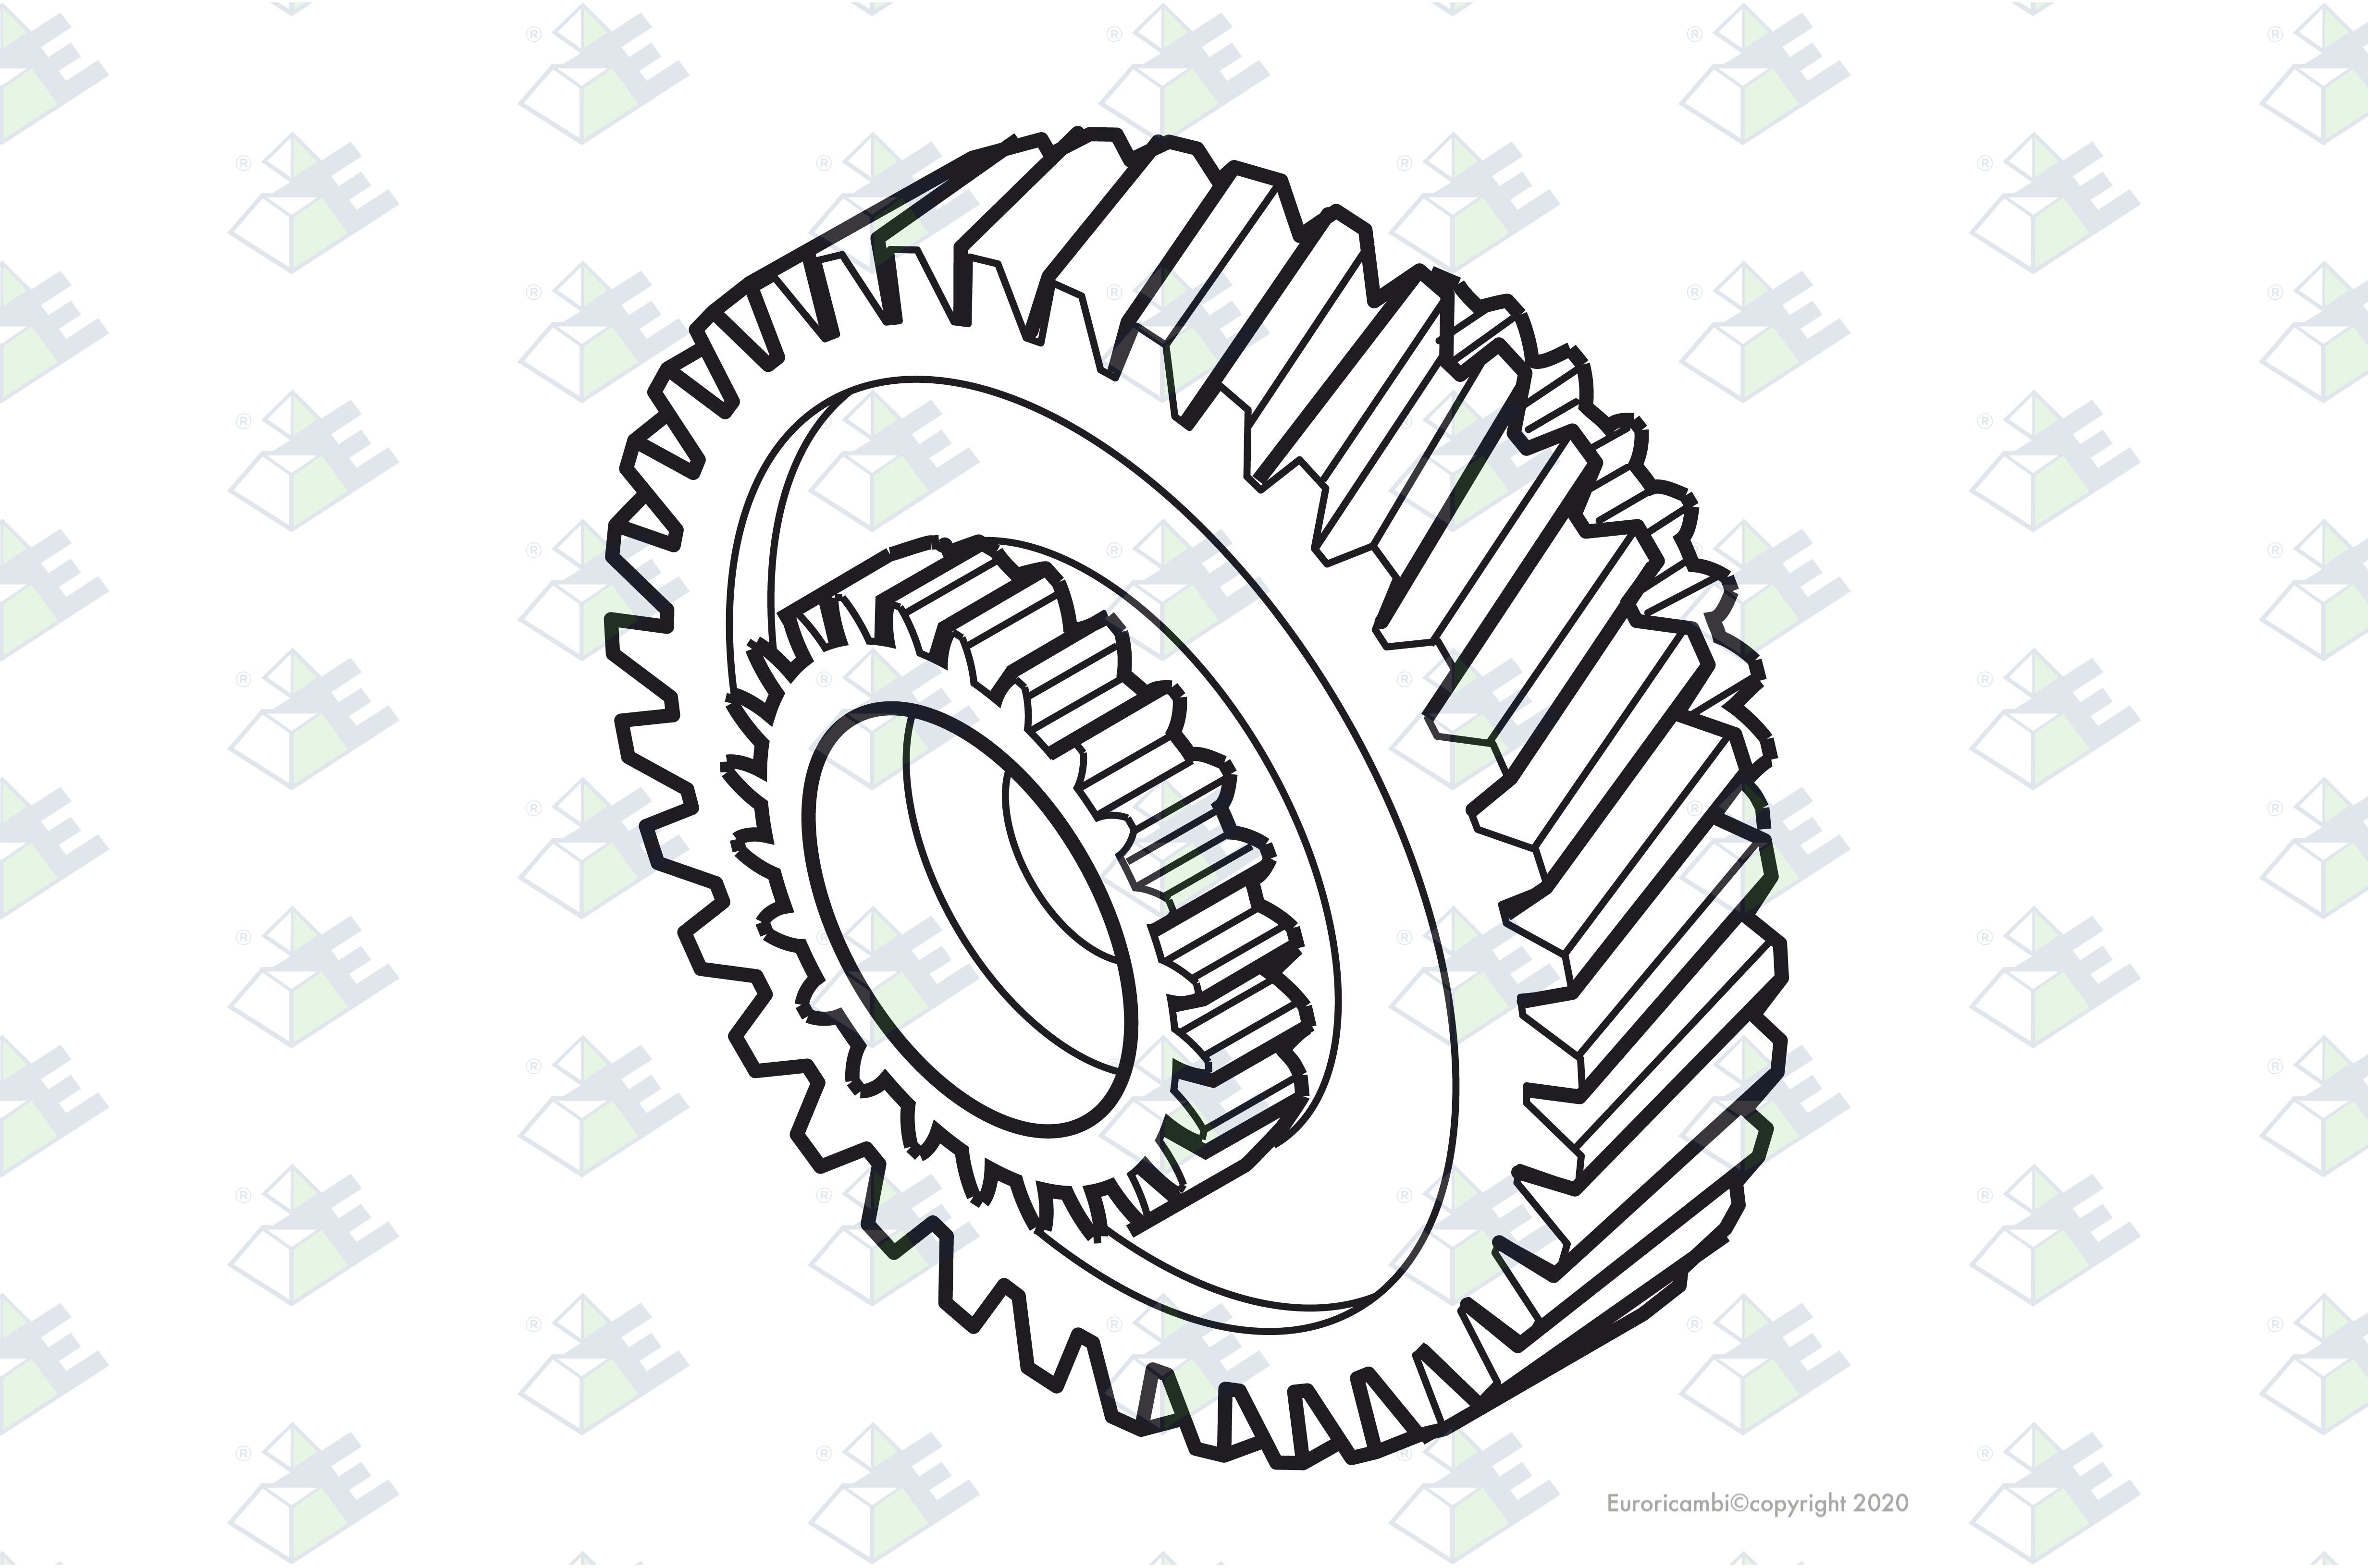 GEAR 4TH SPEED 24 T. suitable to AM GEARS 72594